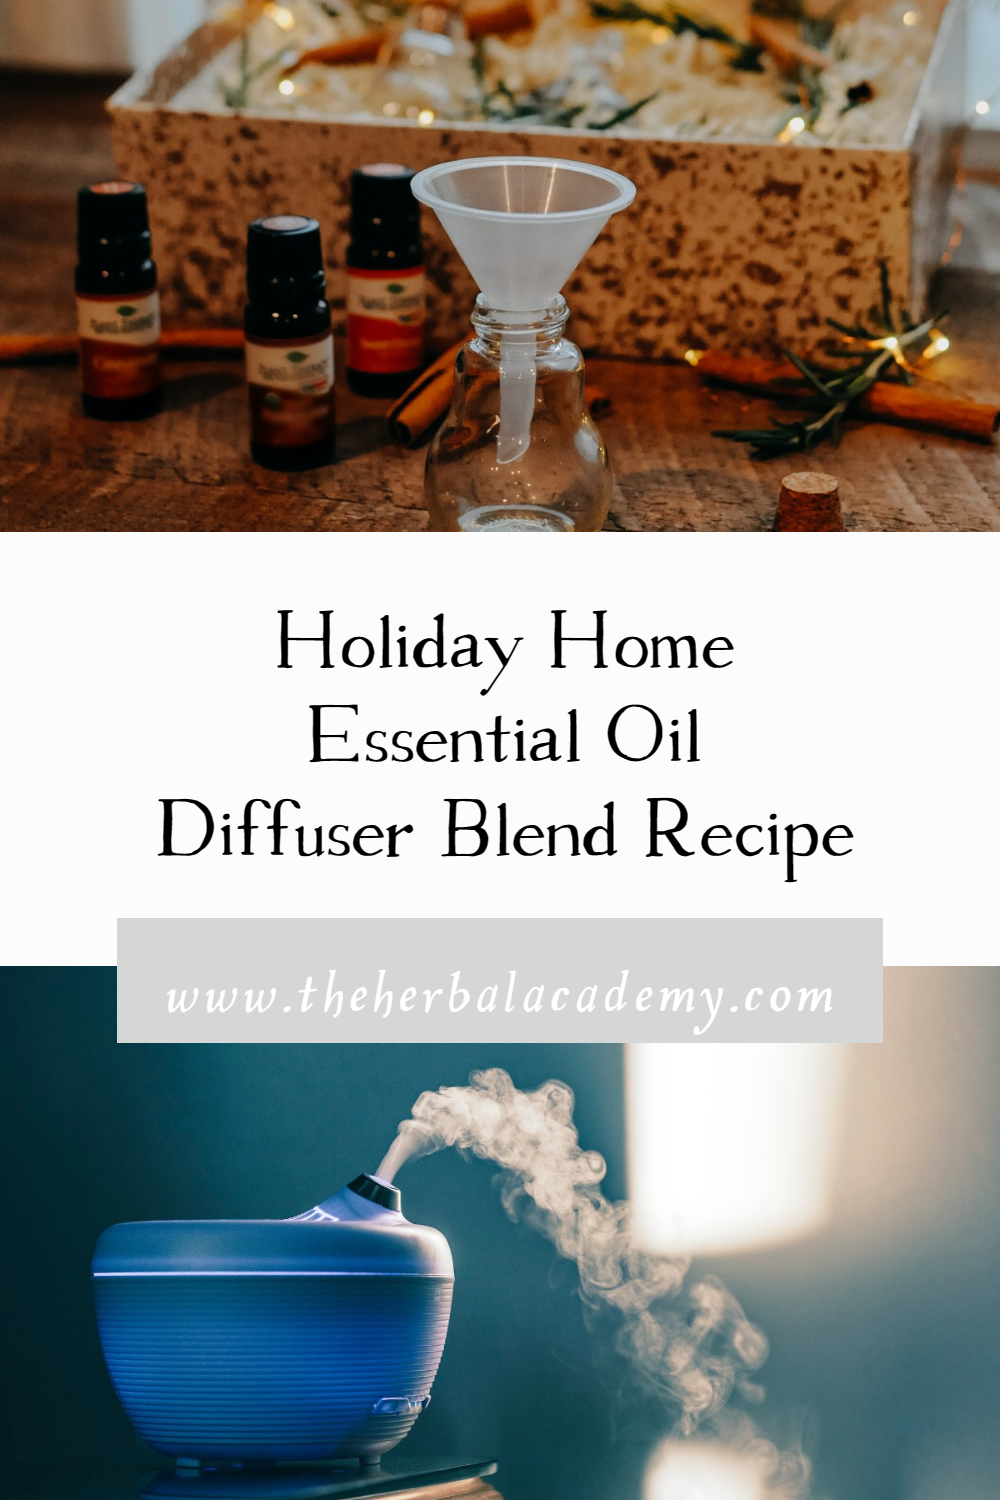 Holiday Home Essential Oil Diffuser Blend Recipe | Herbal Academy | This Holiday Home Diffuser Blend recipe we are sharing is another easy way to make your home smell fantastic and cozy this time of year.